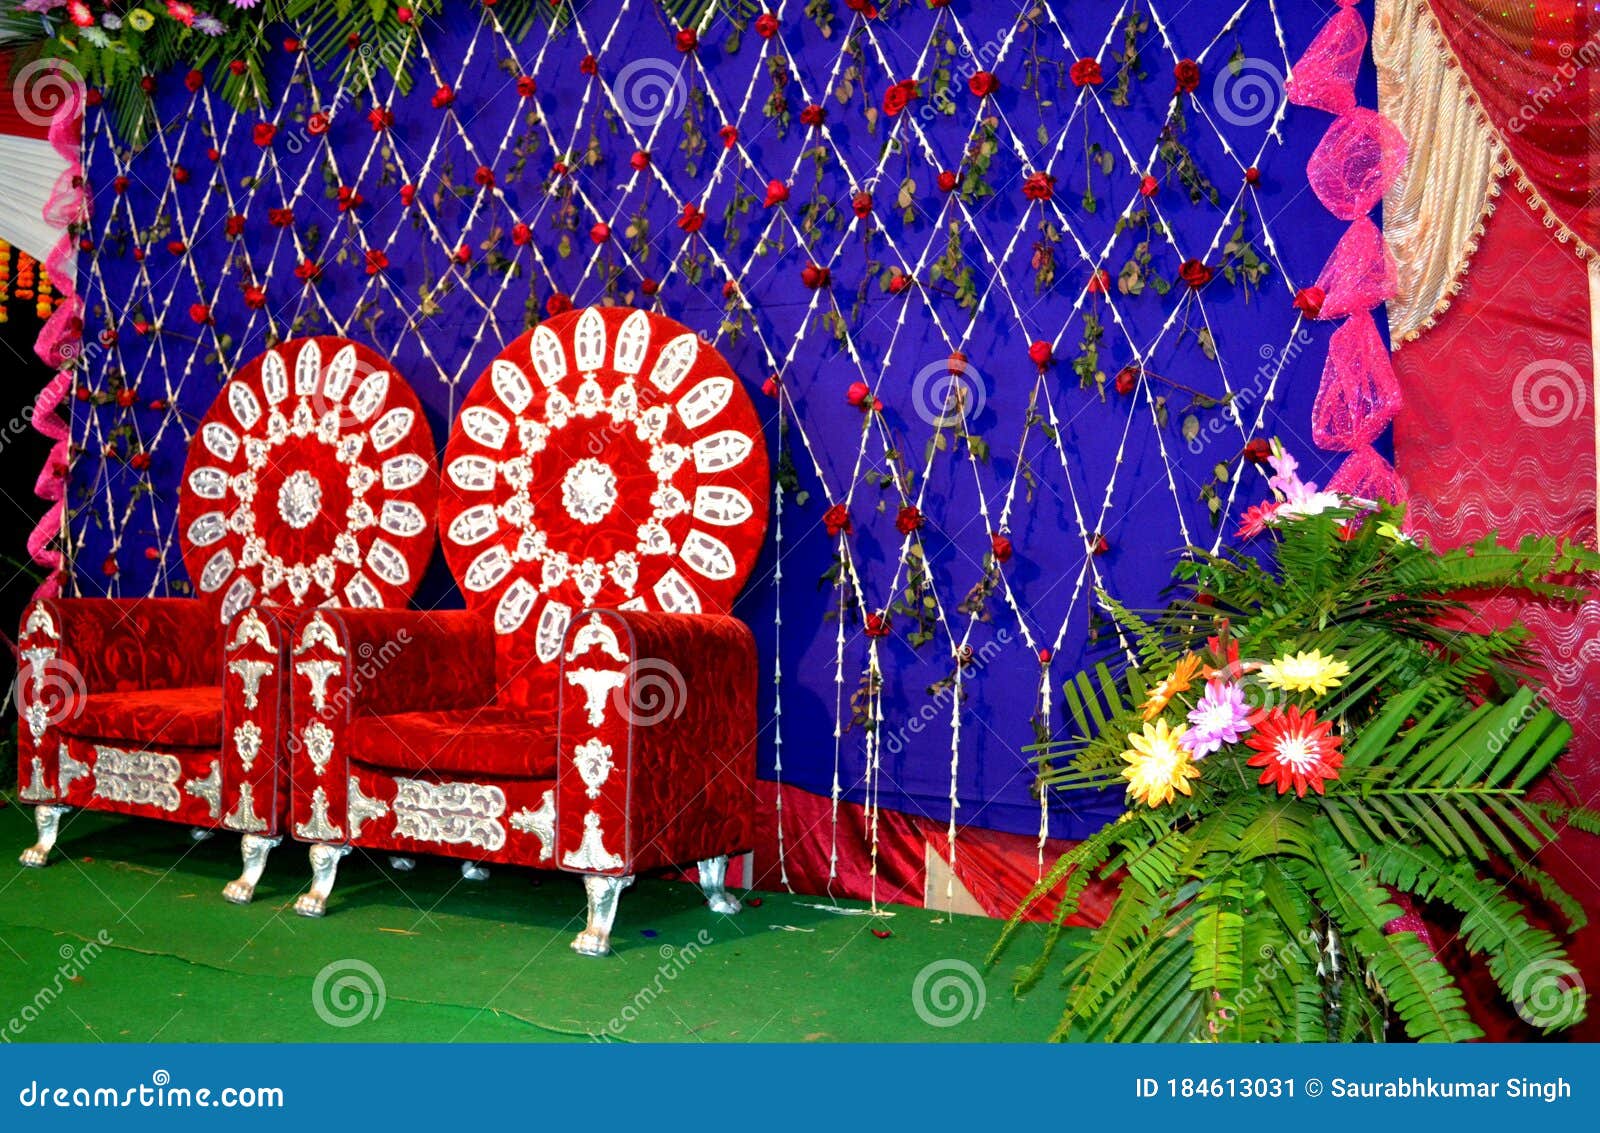 View of Indian Marriage Decoration with Chair Stock Image - Image ...